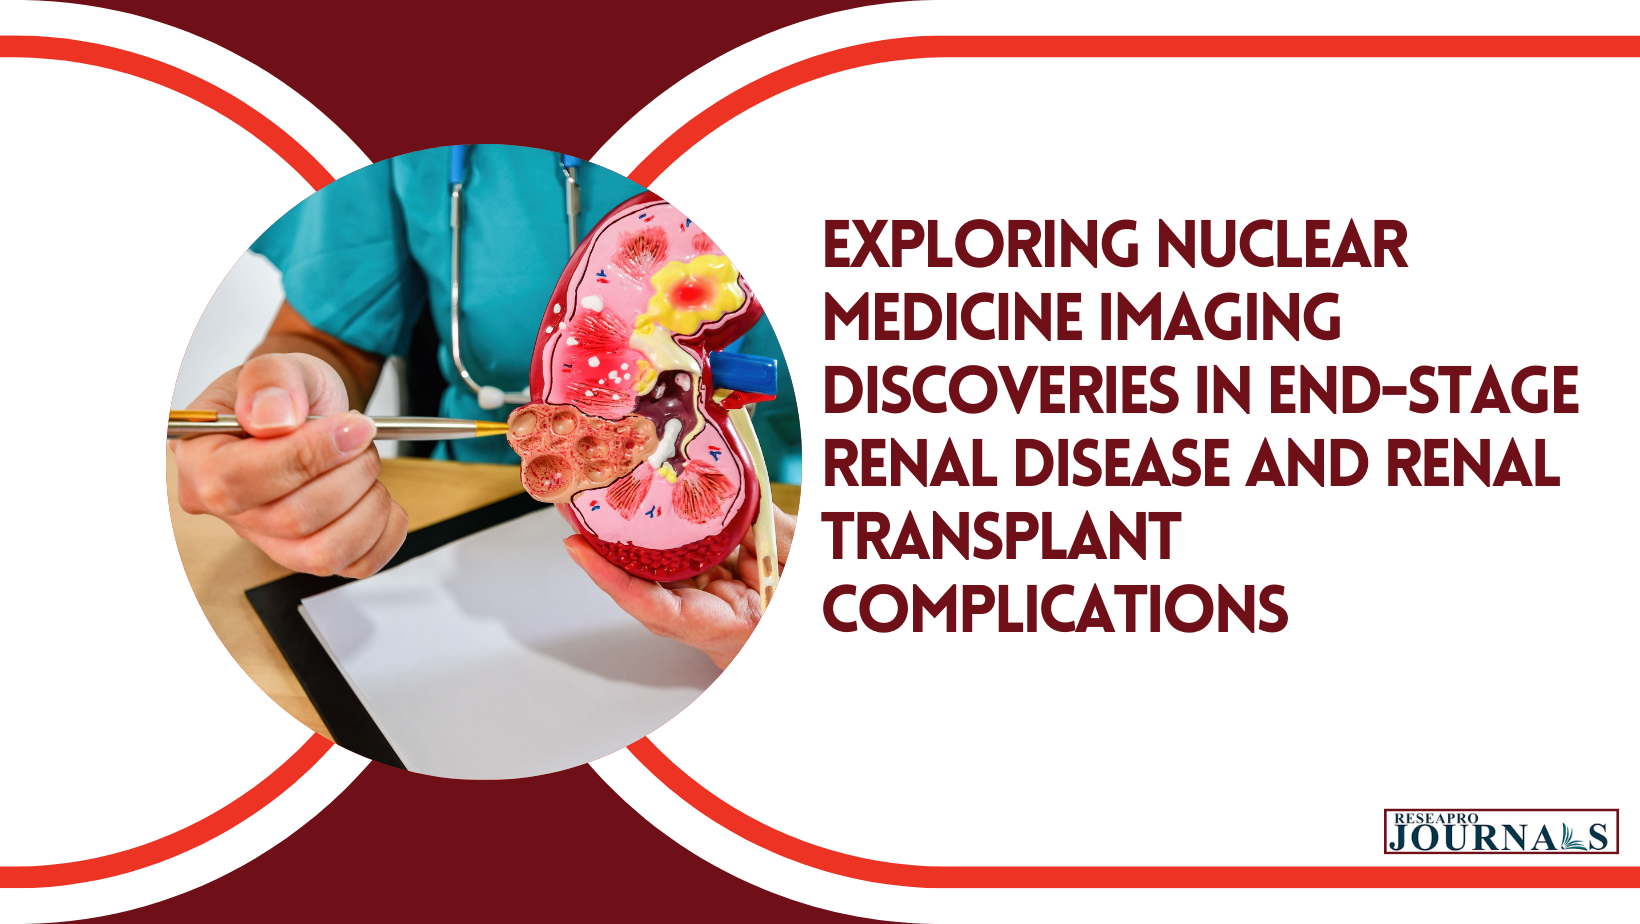 Exploring Nuclear Medicine Imaging Discoveries in End-Stage Renal Disease and Renal Transplant Complications